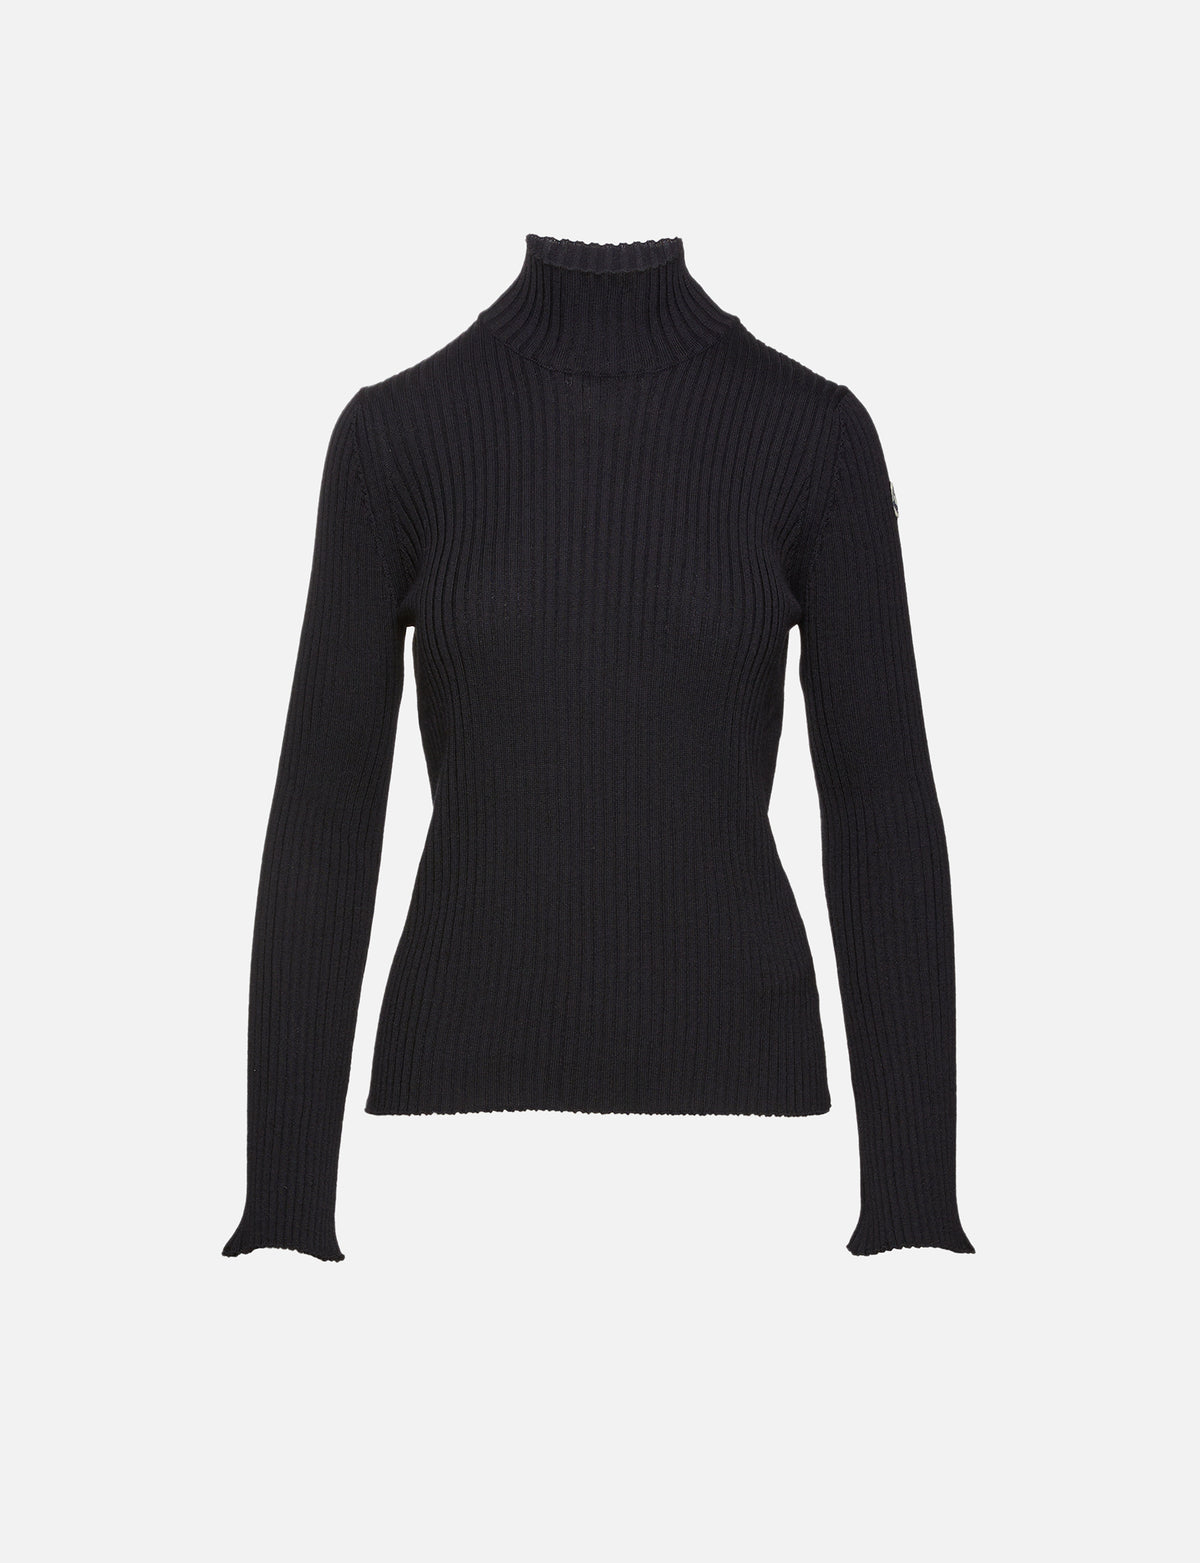 view 1 - T-Neck Sweater